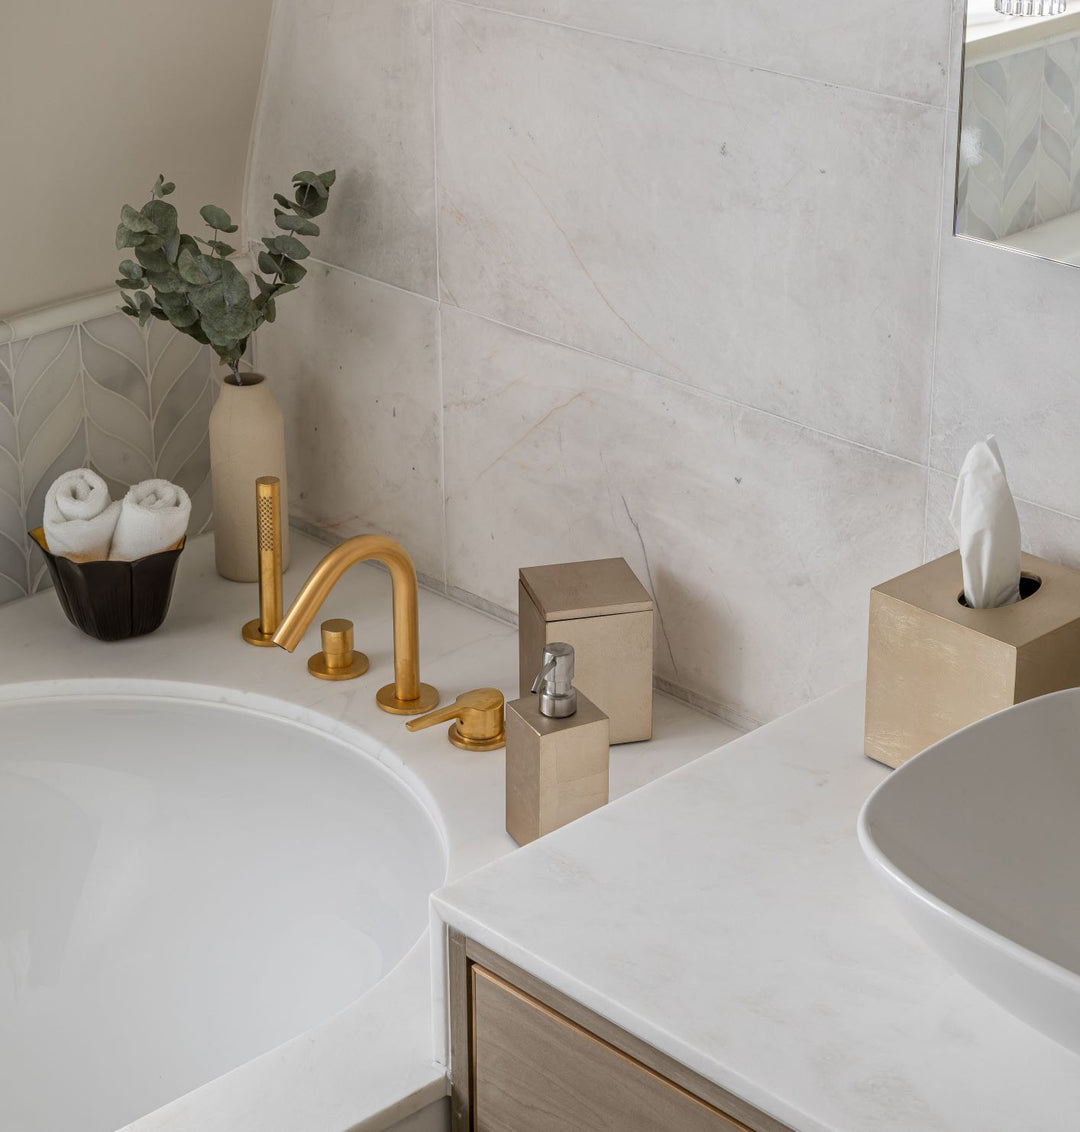 Small Changes, Big Results: Quick & Easy Refreshes For Your Bathroom